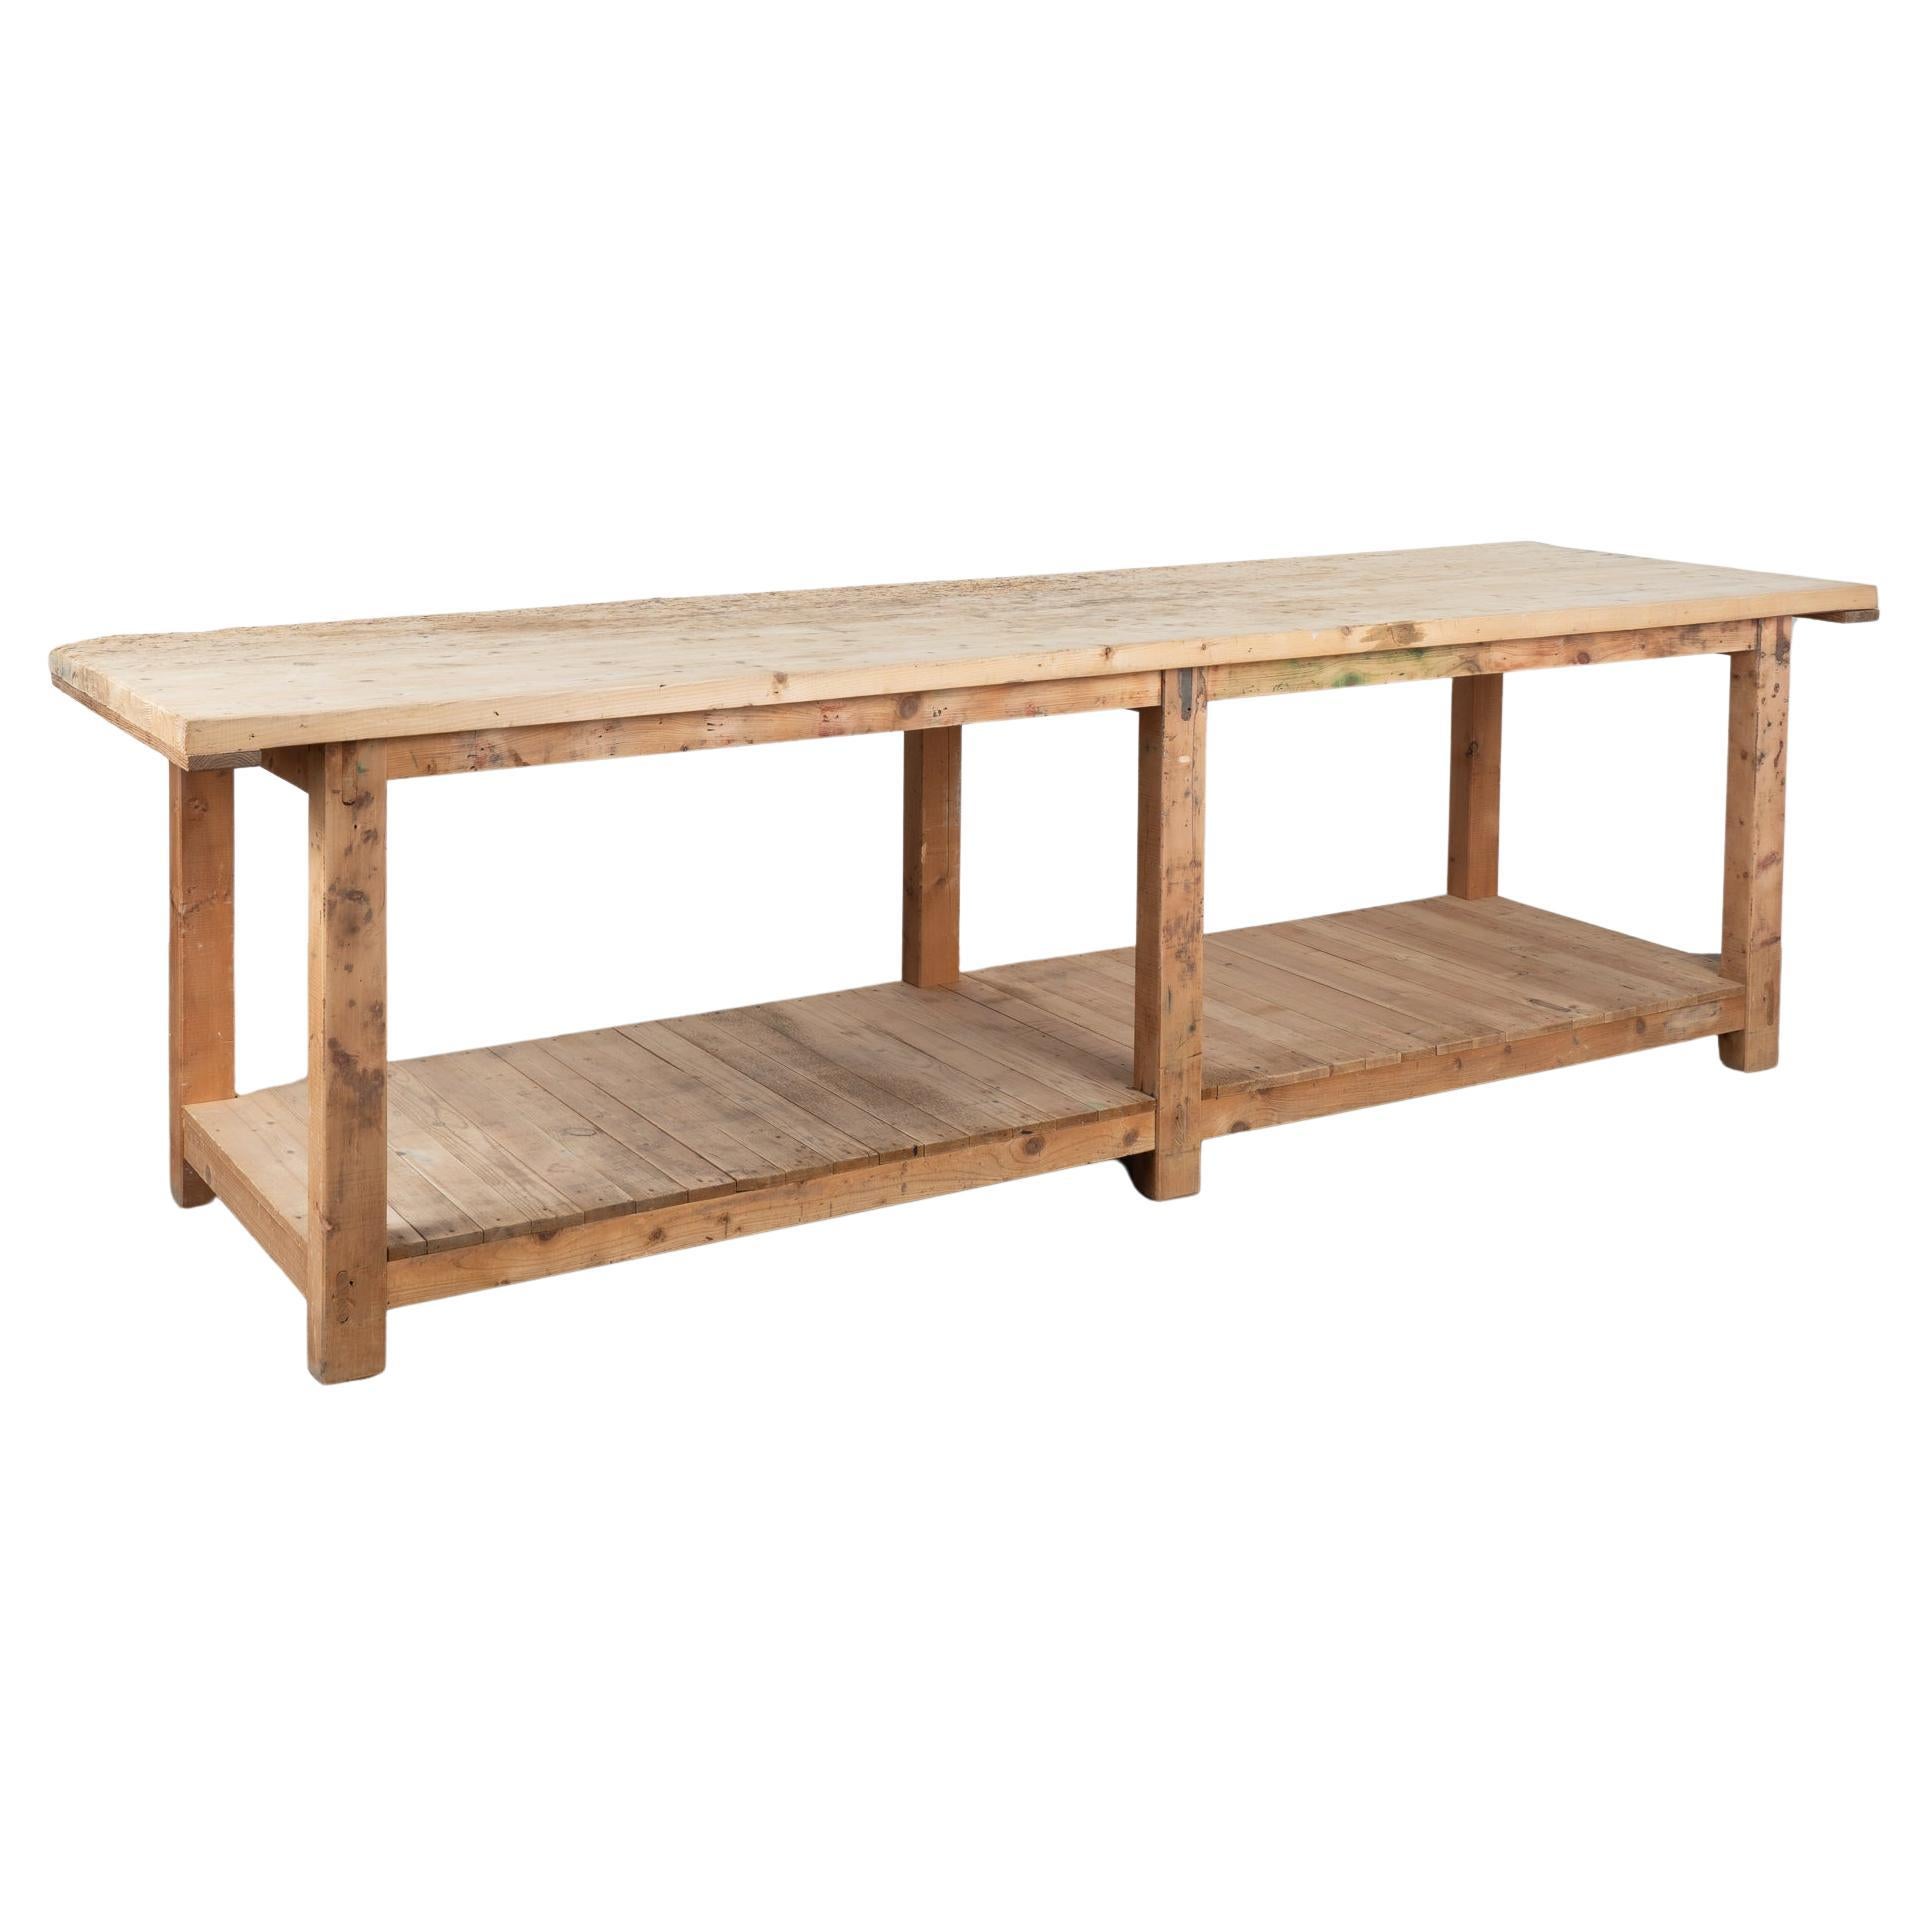 Rustic 10' Long Work Table Kitchen Island With Shelf, Hungary circa 1900 For Sale